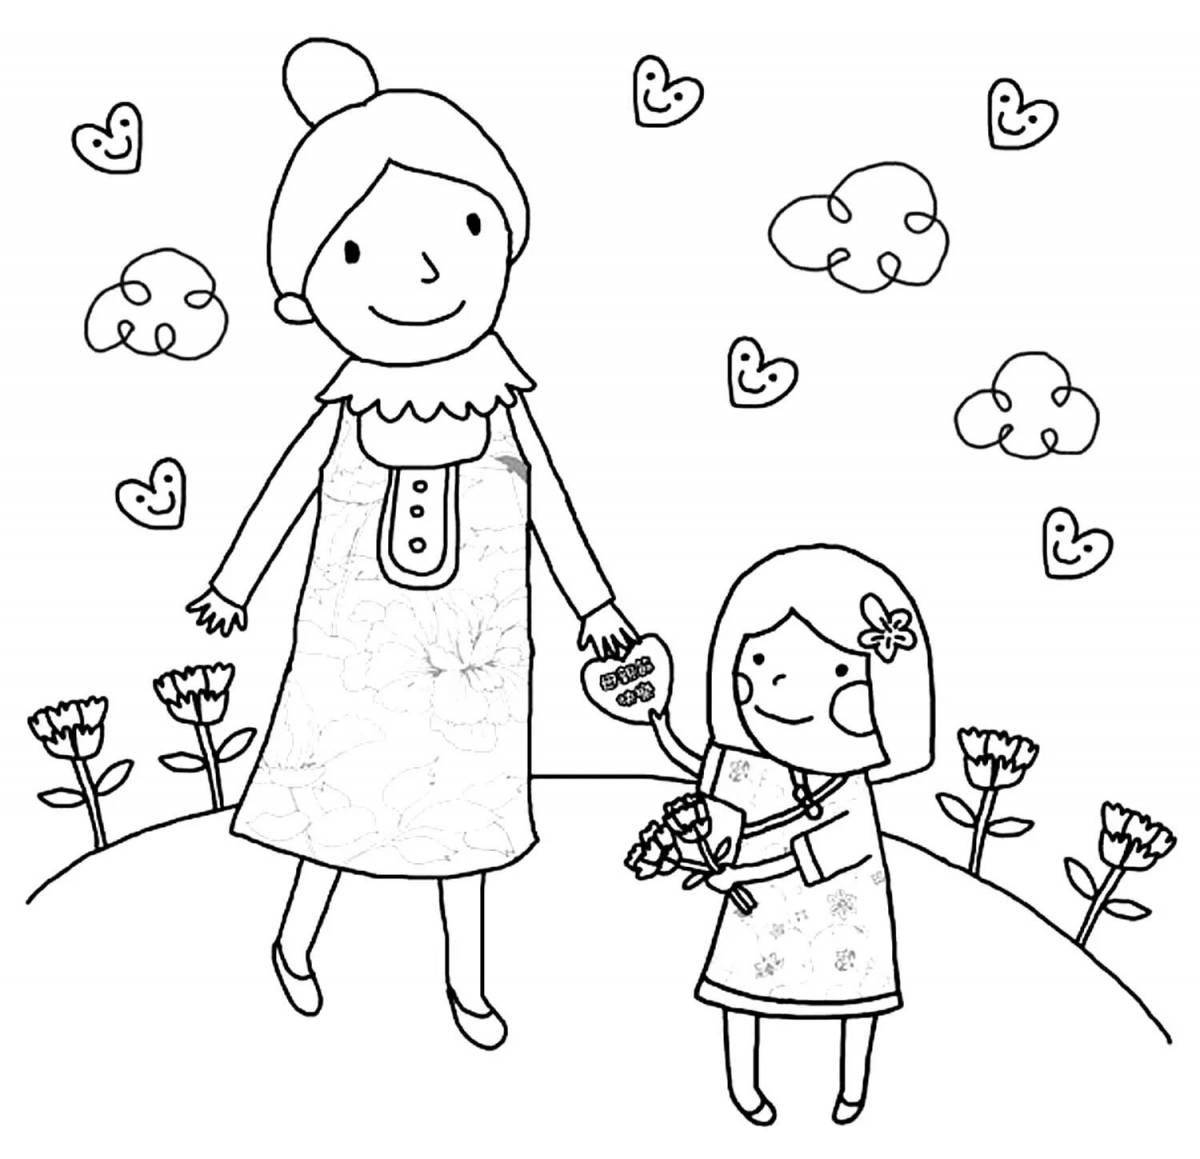 Colorful daughter coloring page